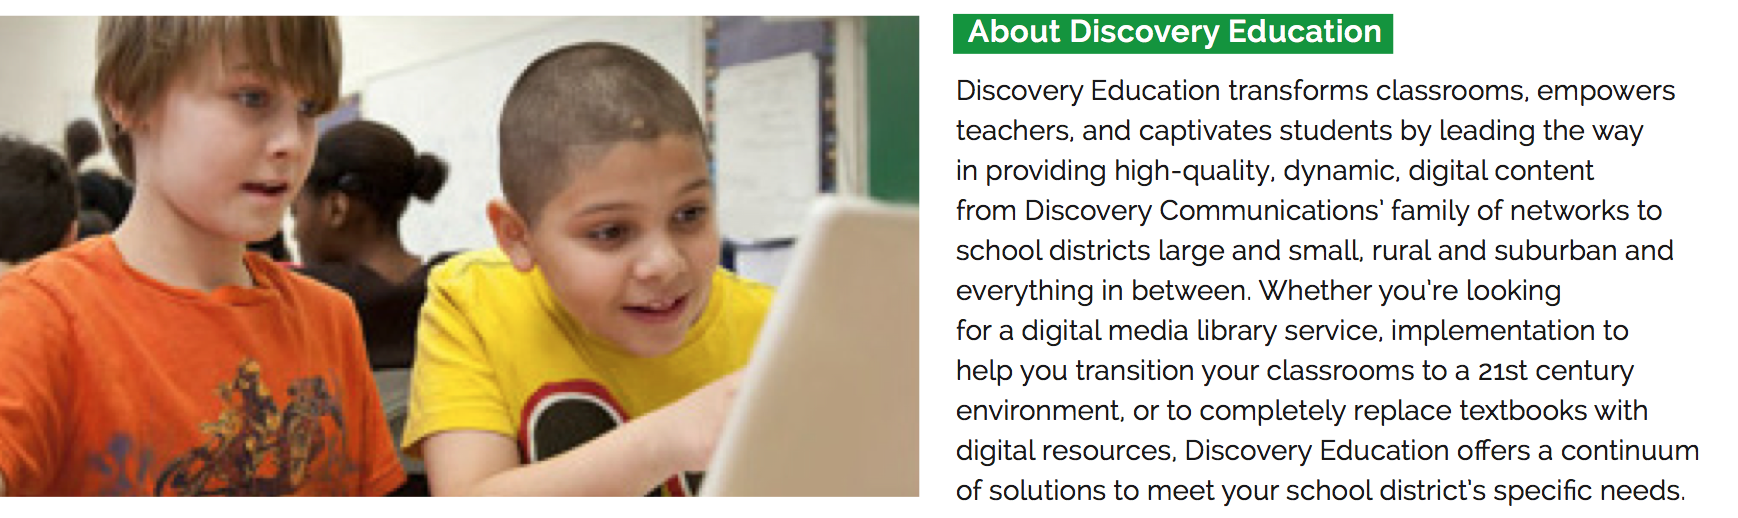 About Discovery Education